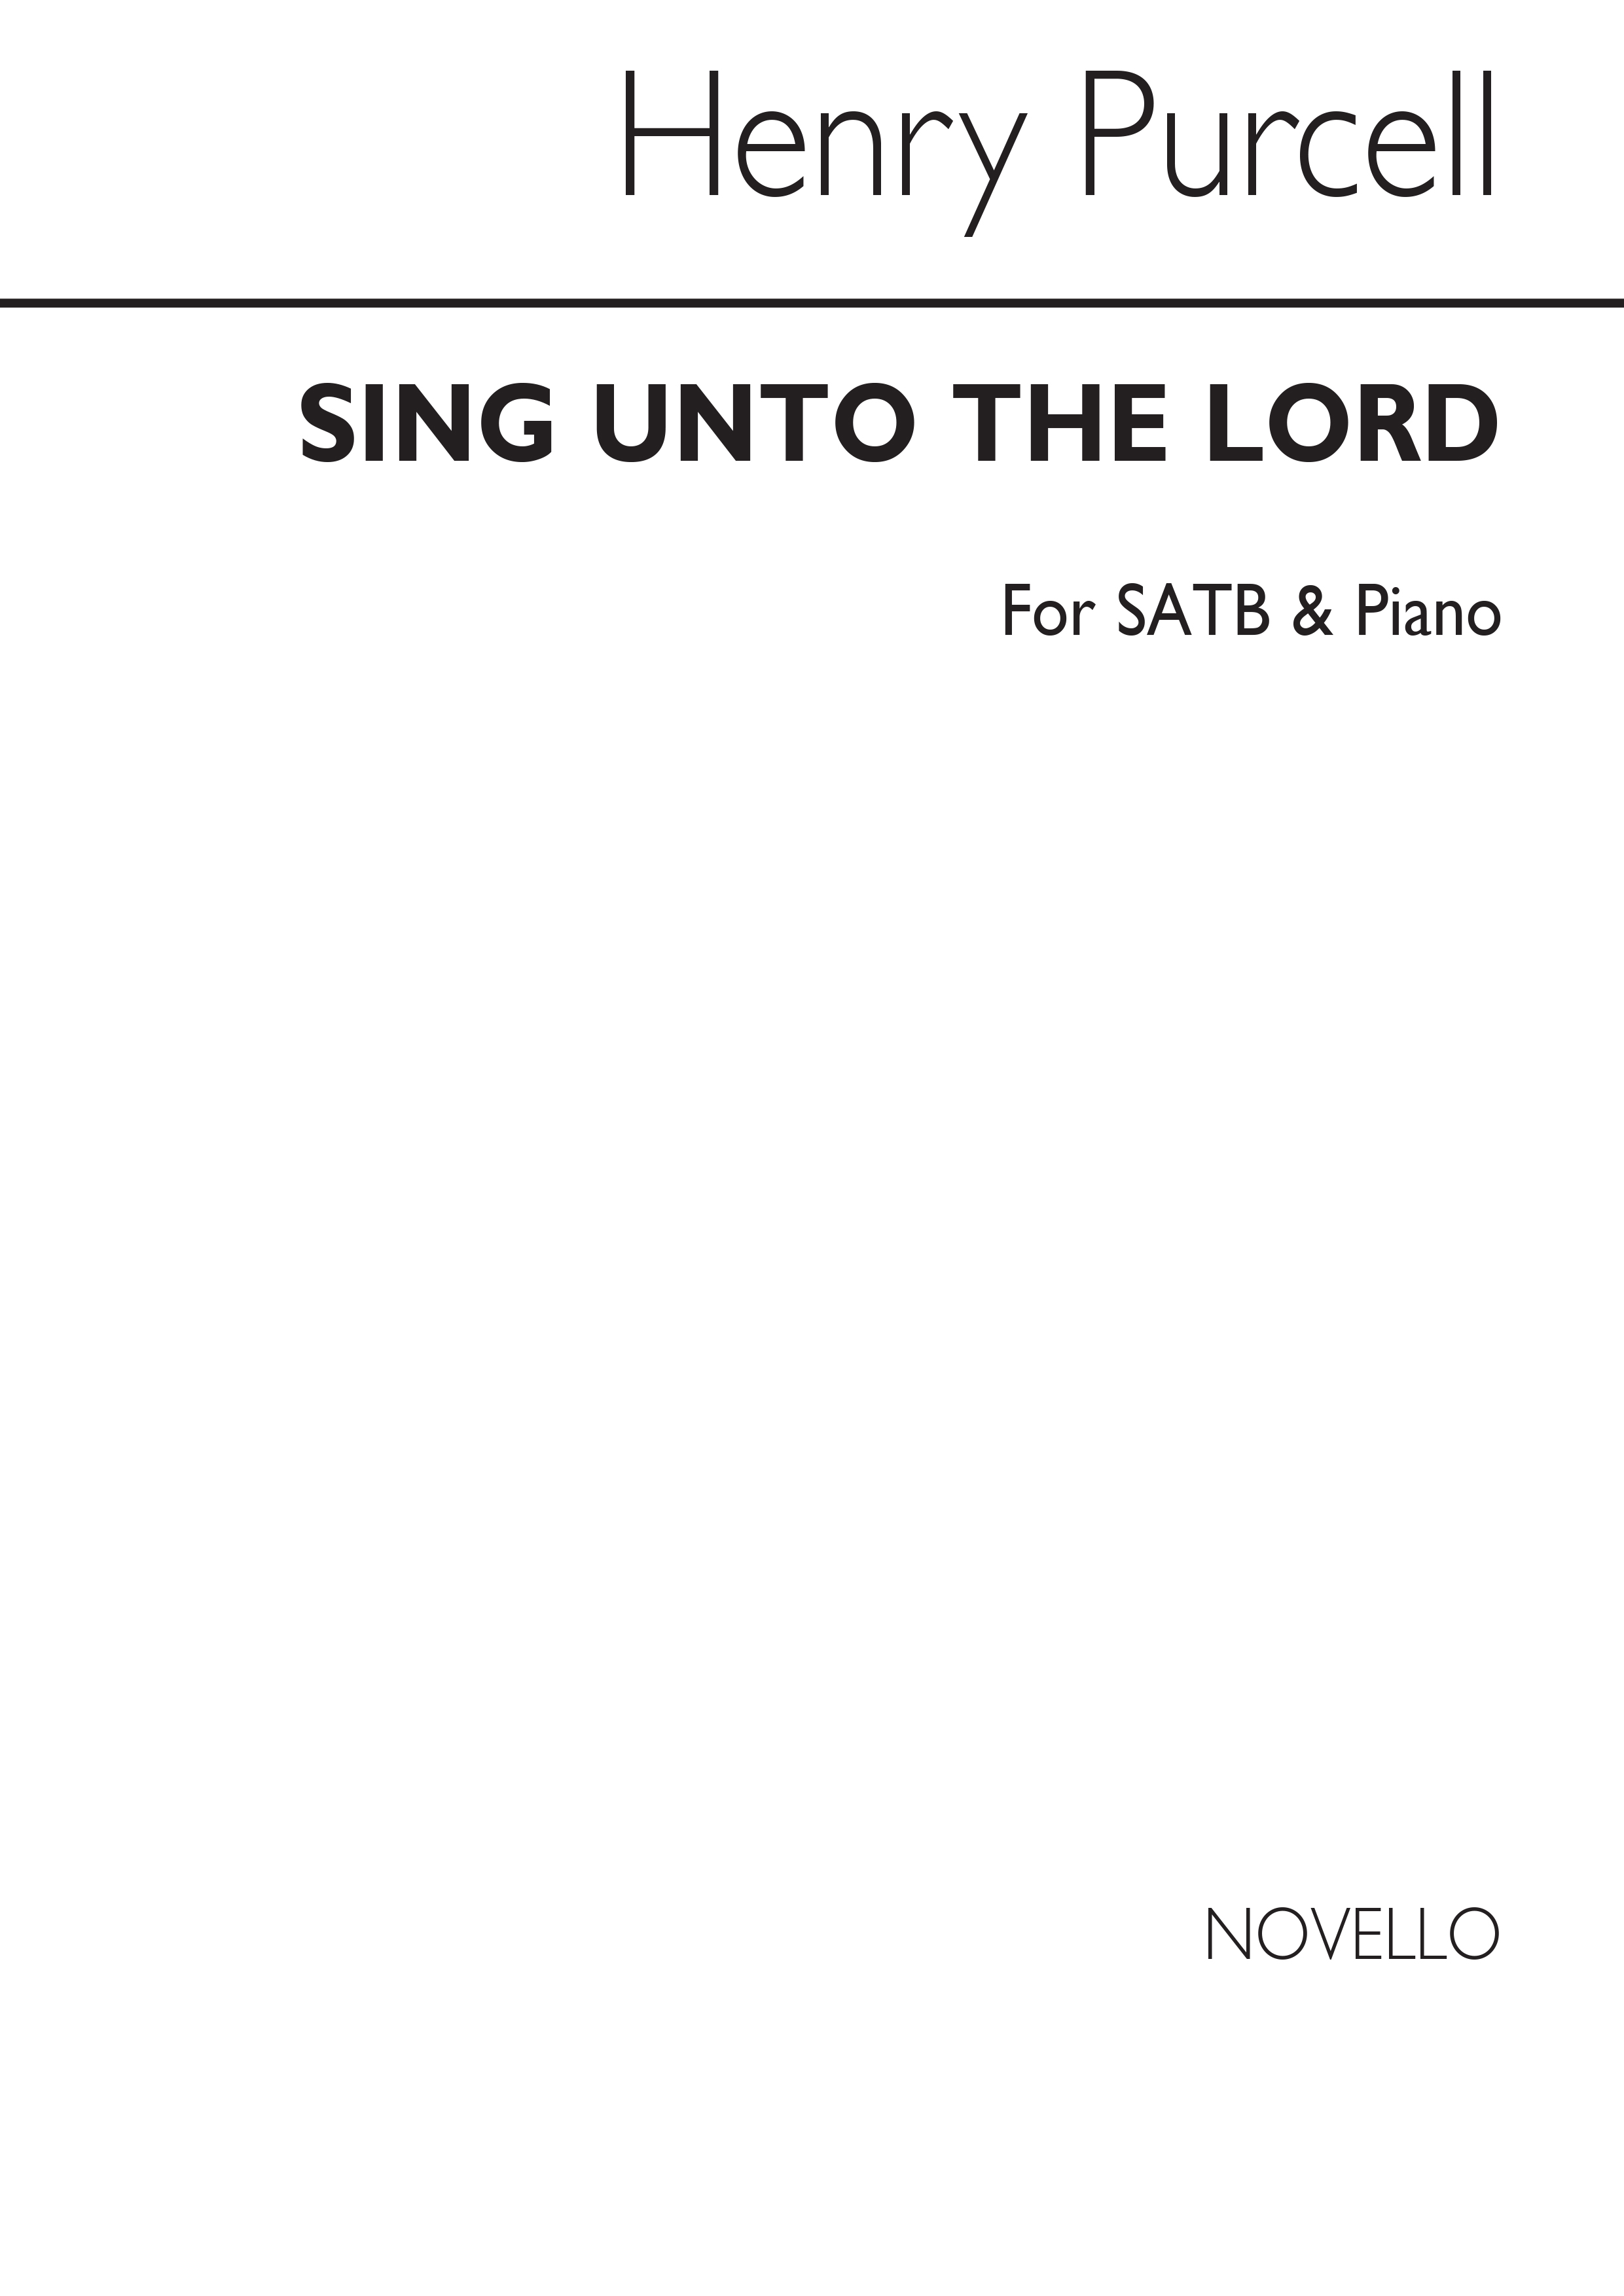 Henry Purcell: O Sing Unto The Lord Satb/Piano (Also Shows String Parts)